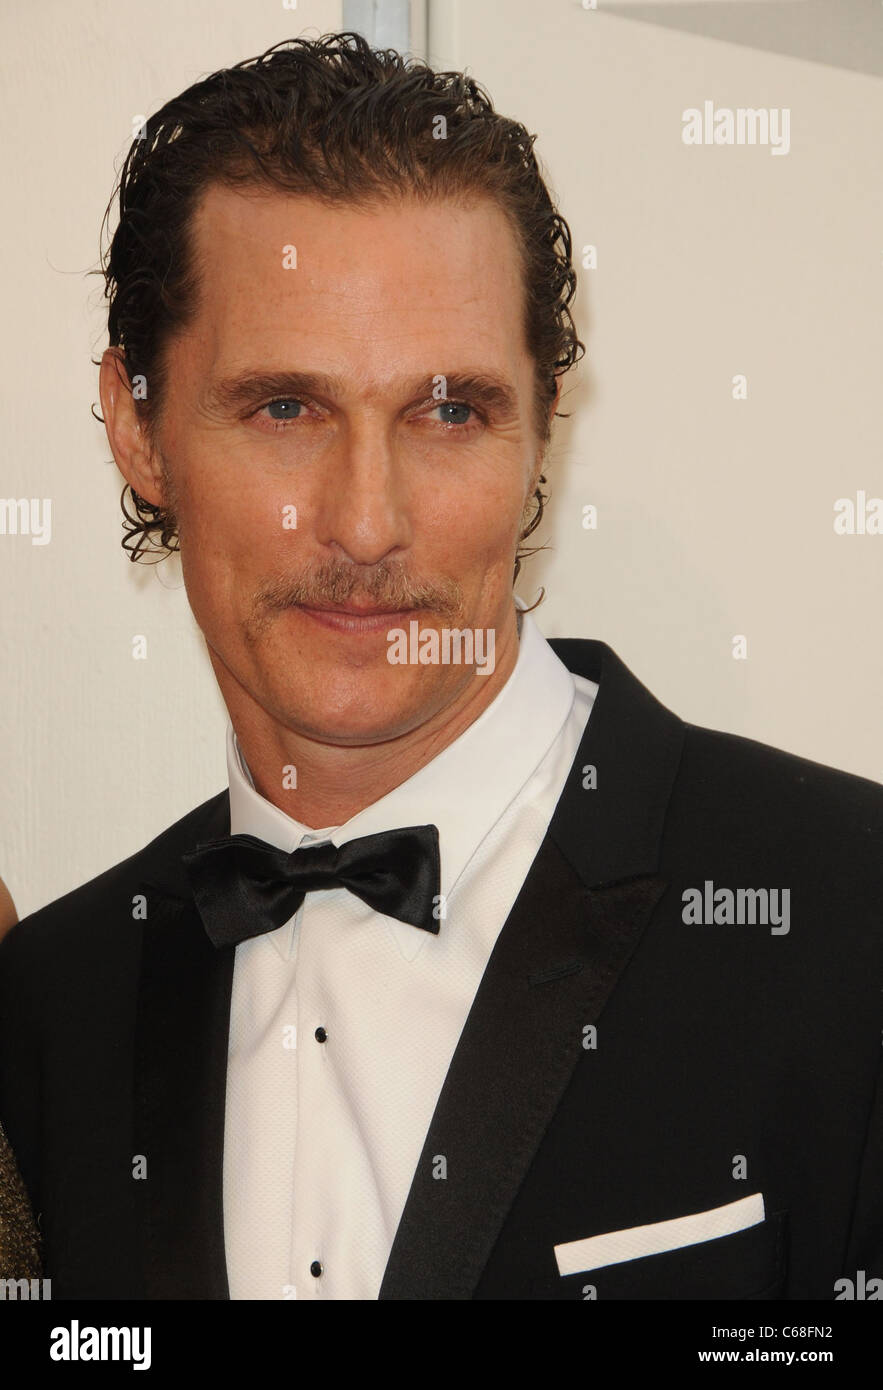 Camila Alves, Matthew McConaughey at arrivals for American Film Institute (AFI) 39th Life Achievement Award: A Tribute to Morgan Freeman, Sony Lot, Culver City, CA June 9, 2011. Photo By: Dee Cercone/Everett Collection Stock Photo